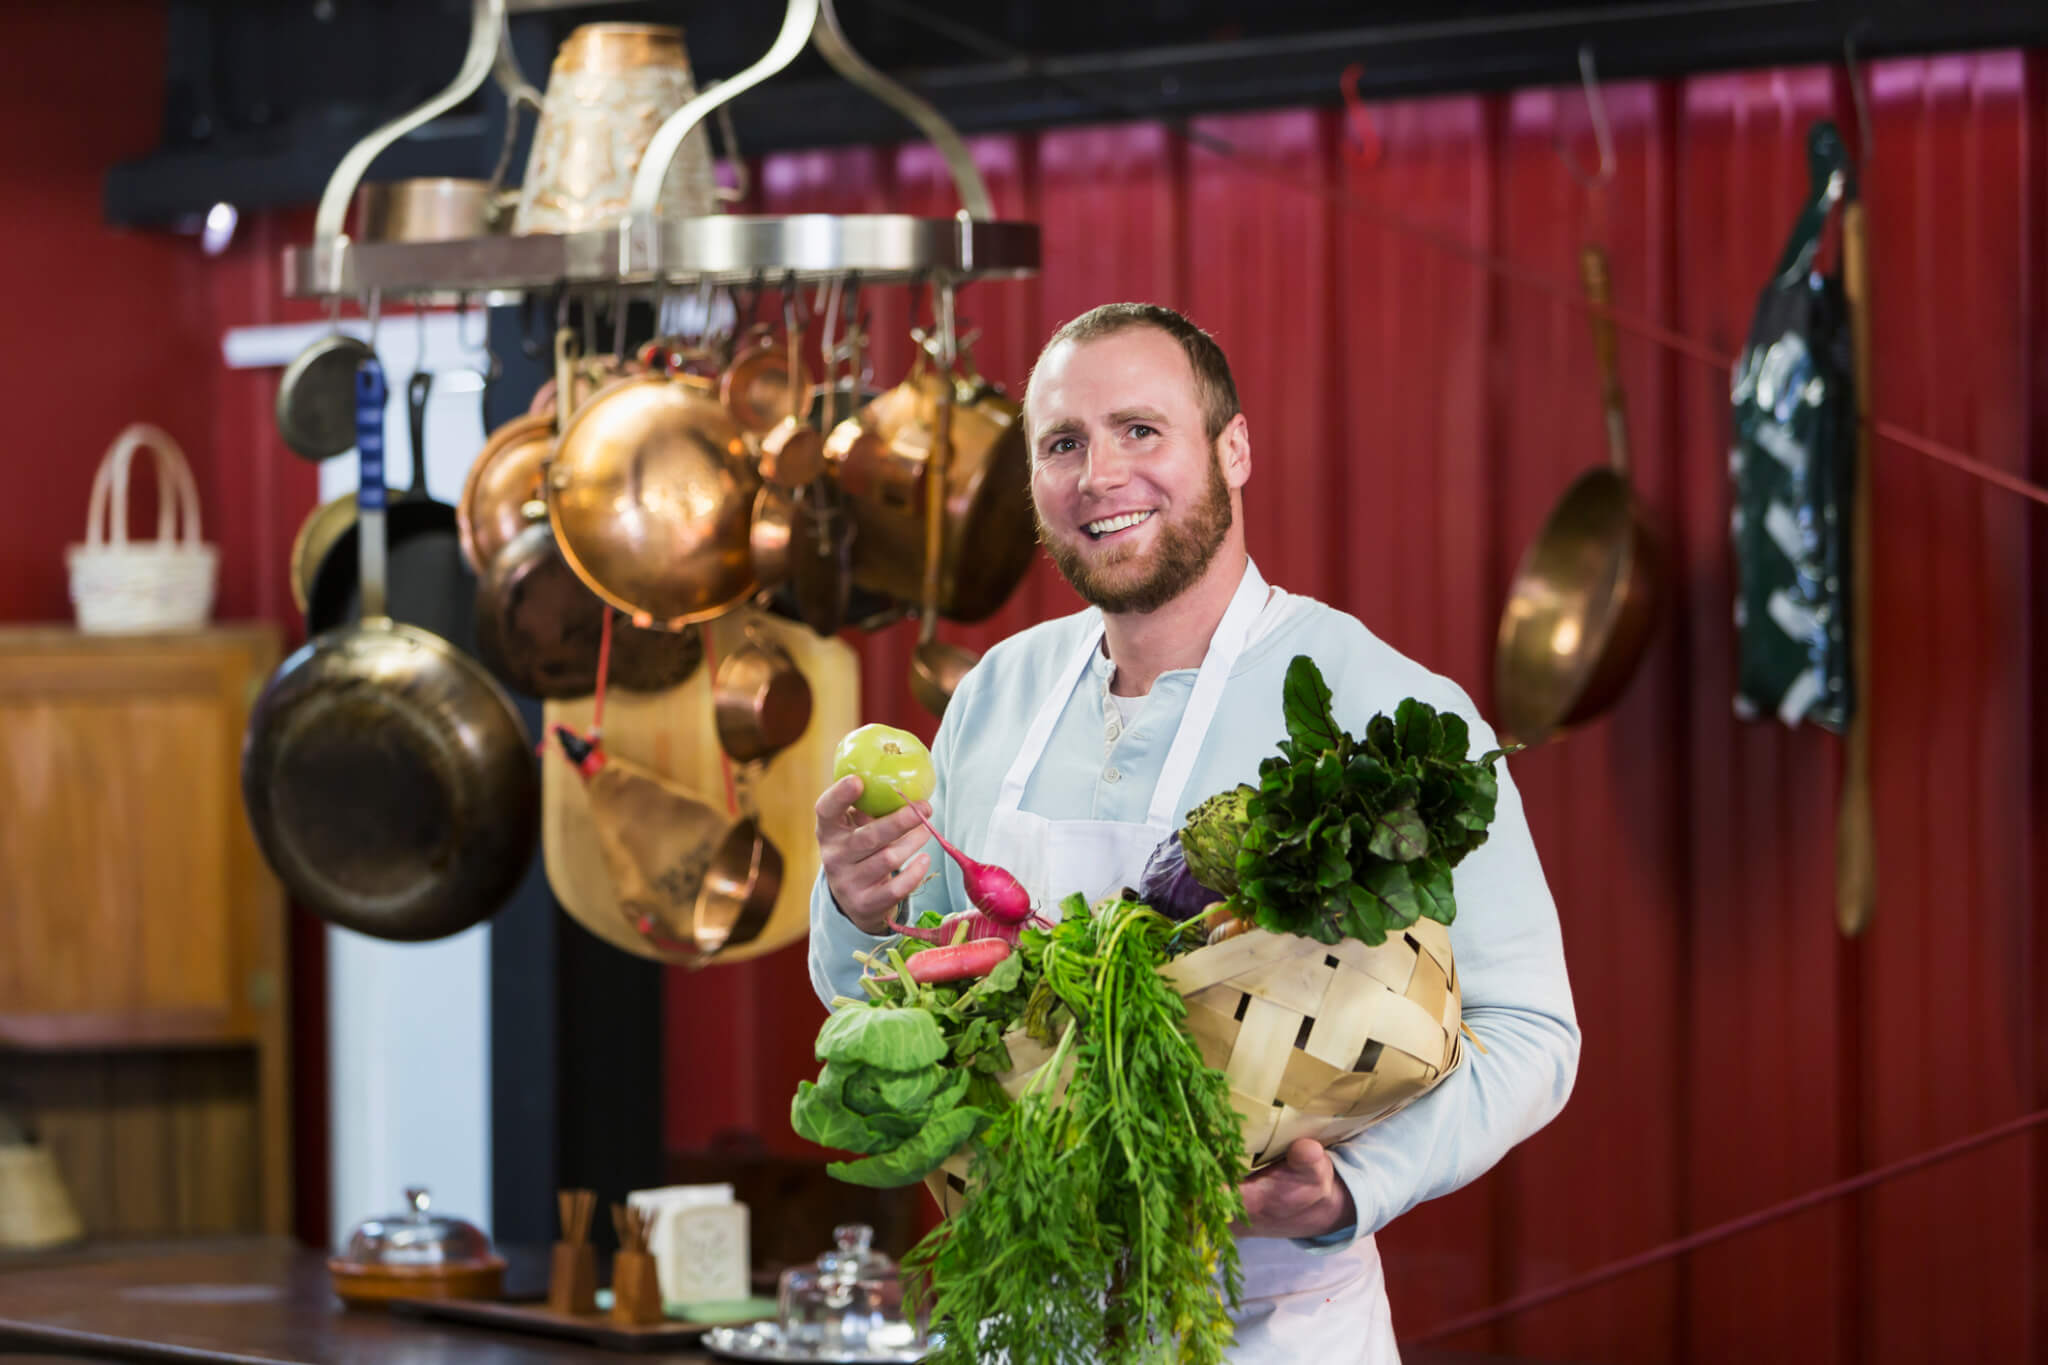 sustainable dining chef with fresh produce in his resturant